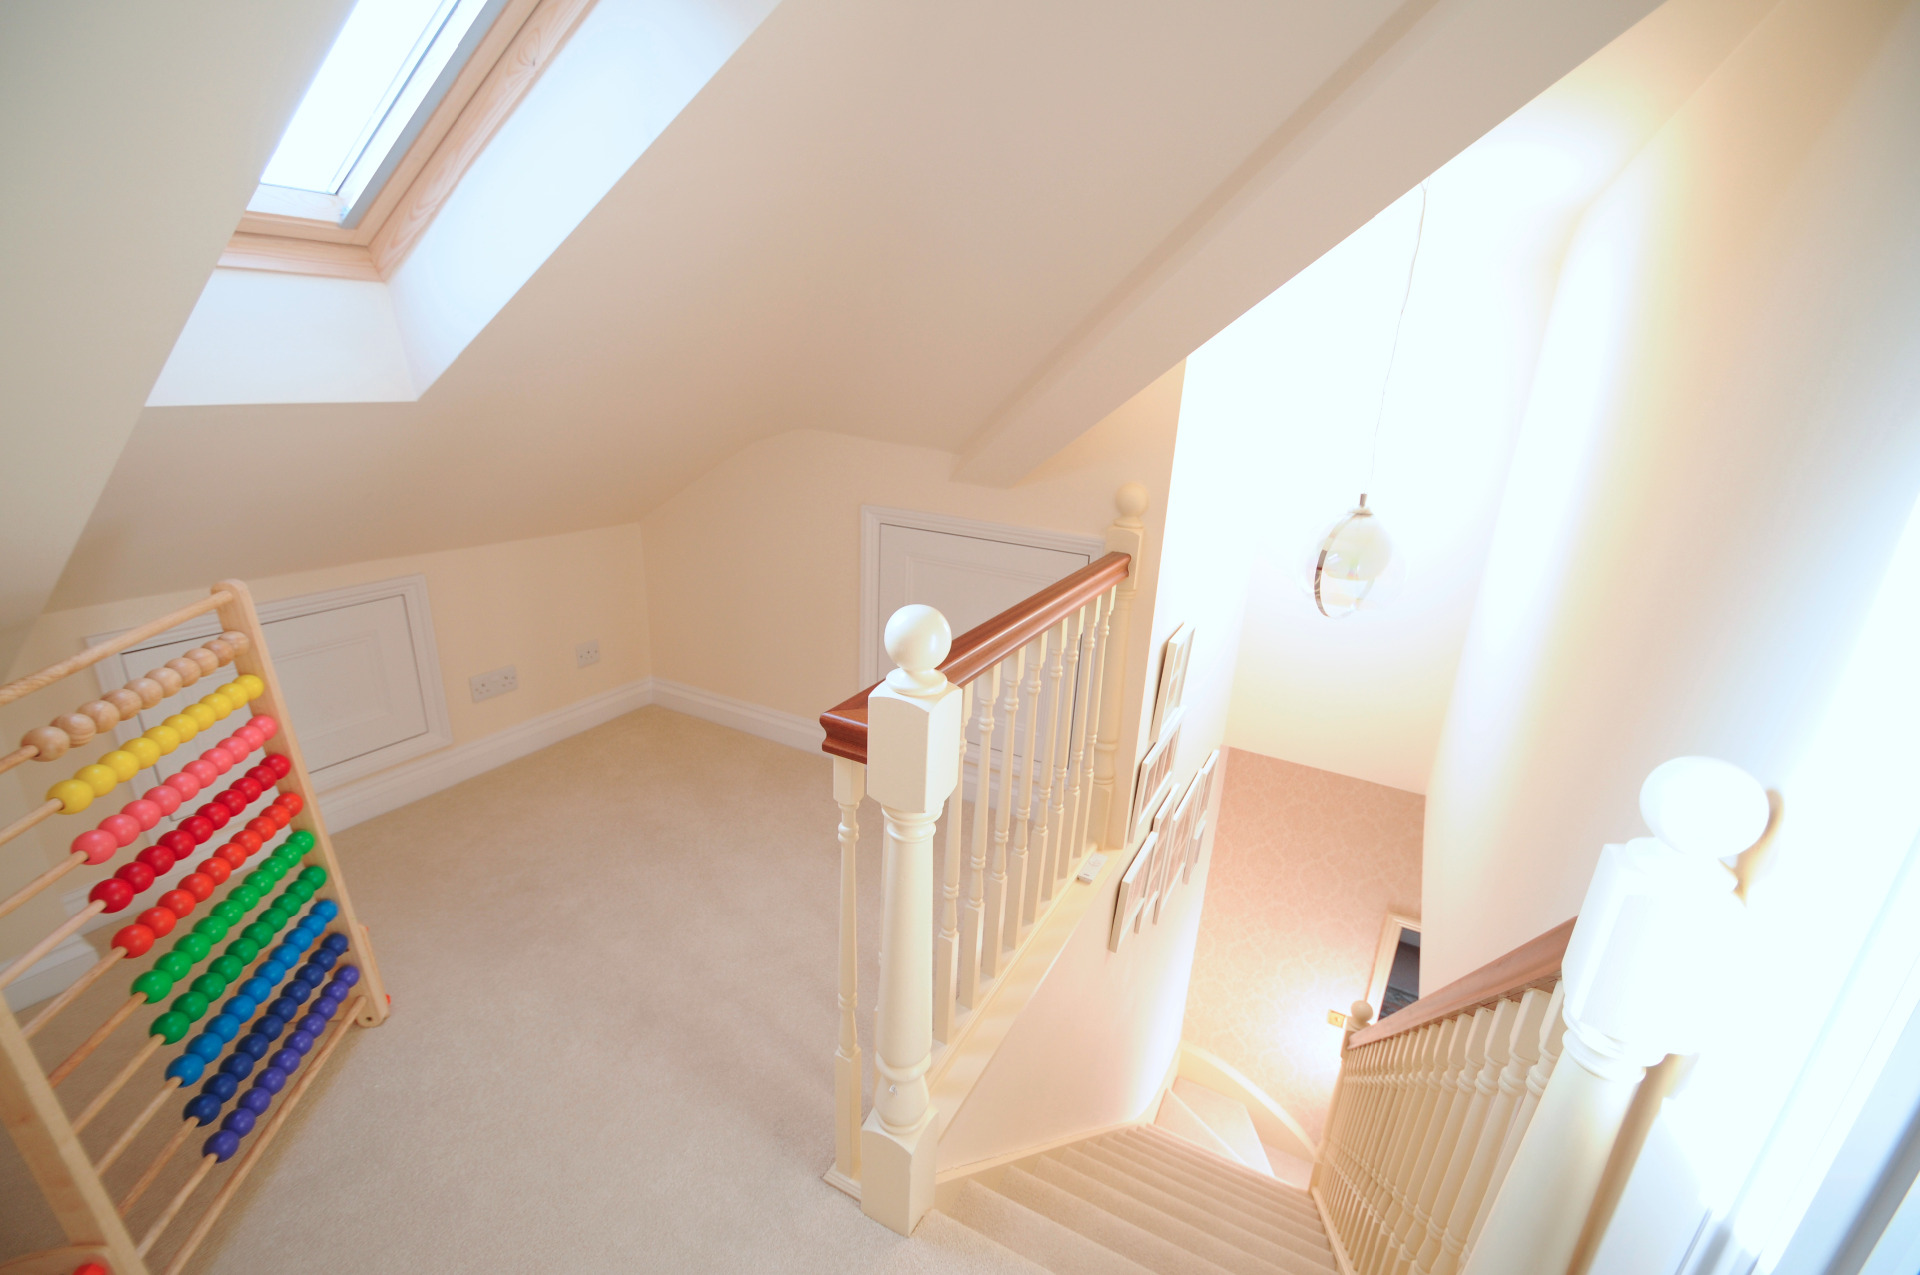 Bespoke hand-made staircase in full loft conversion, Berkshire